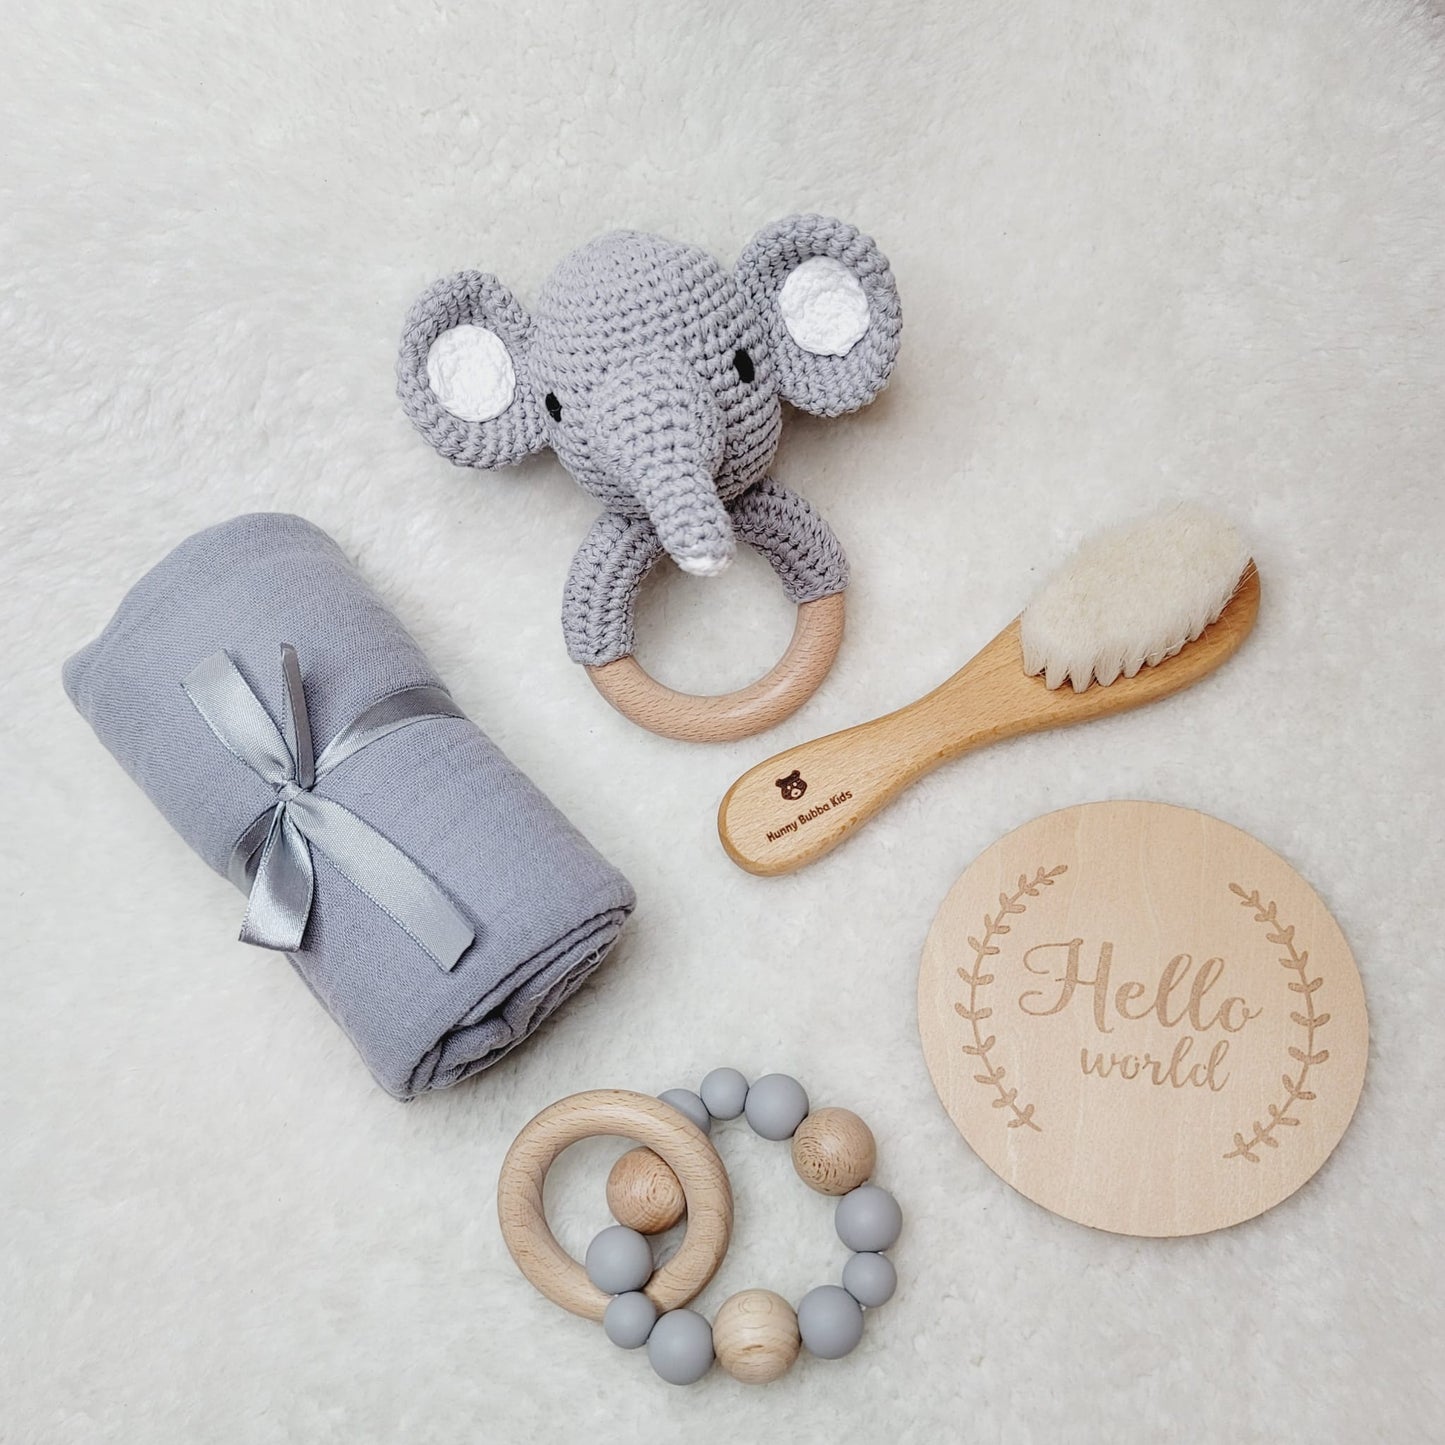 a grey newborn baby gift set with an elephant crochet rattle, a hairbrush, and wooden and silicone rattle and a swaddle laid on a soft surface